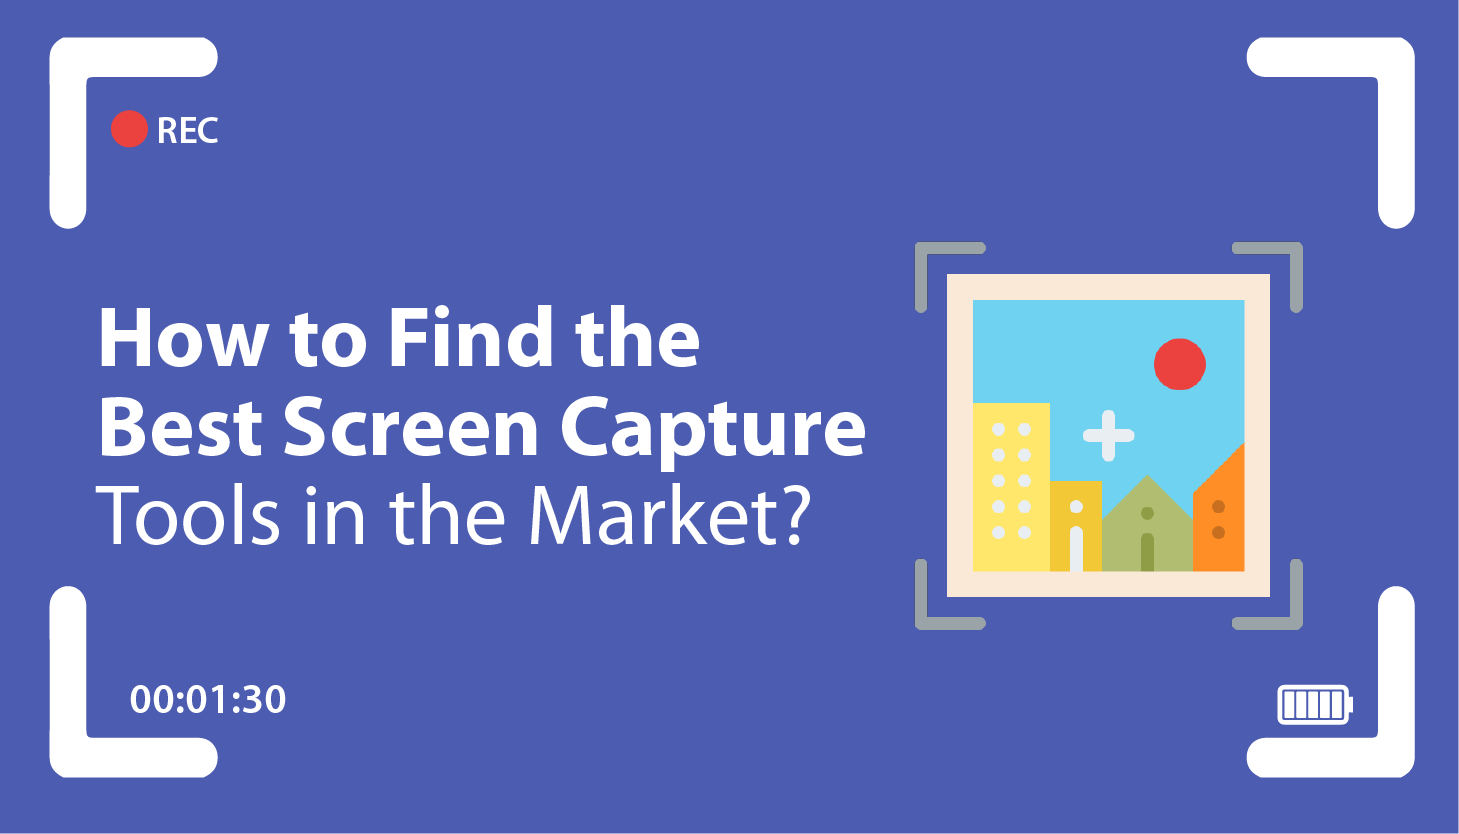  How to Find the Best Screen Capture Tools in the Market